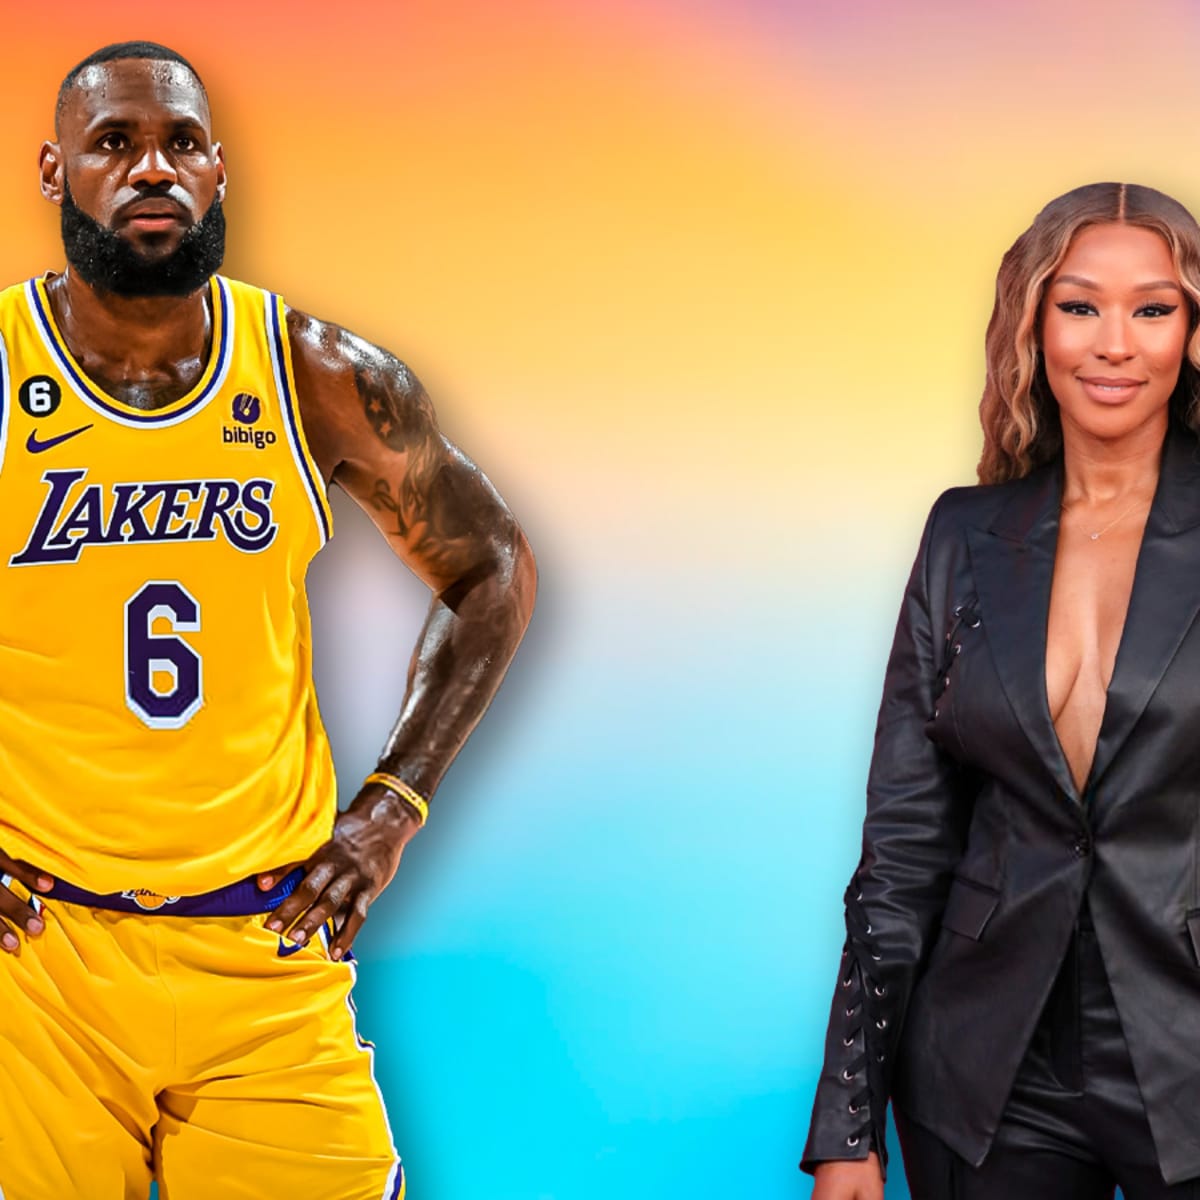 Savannah James On How She Curates LeBron's Skin-Care Routine